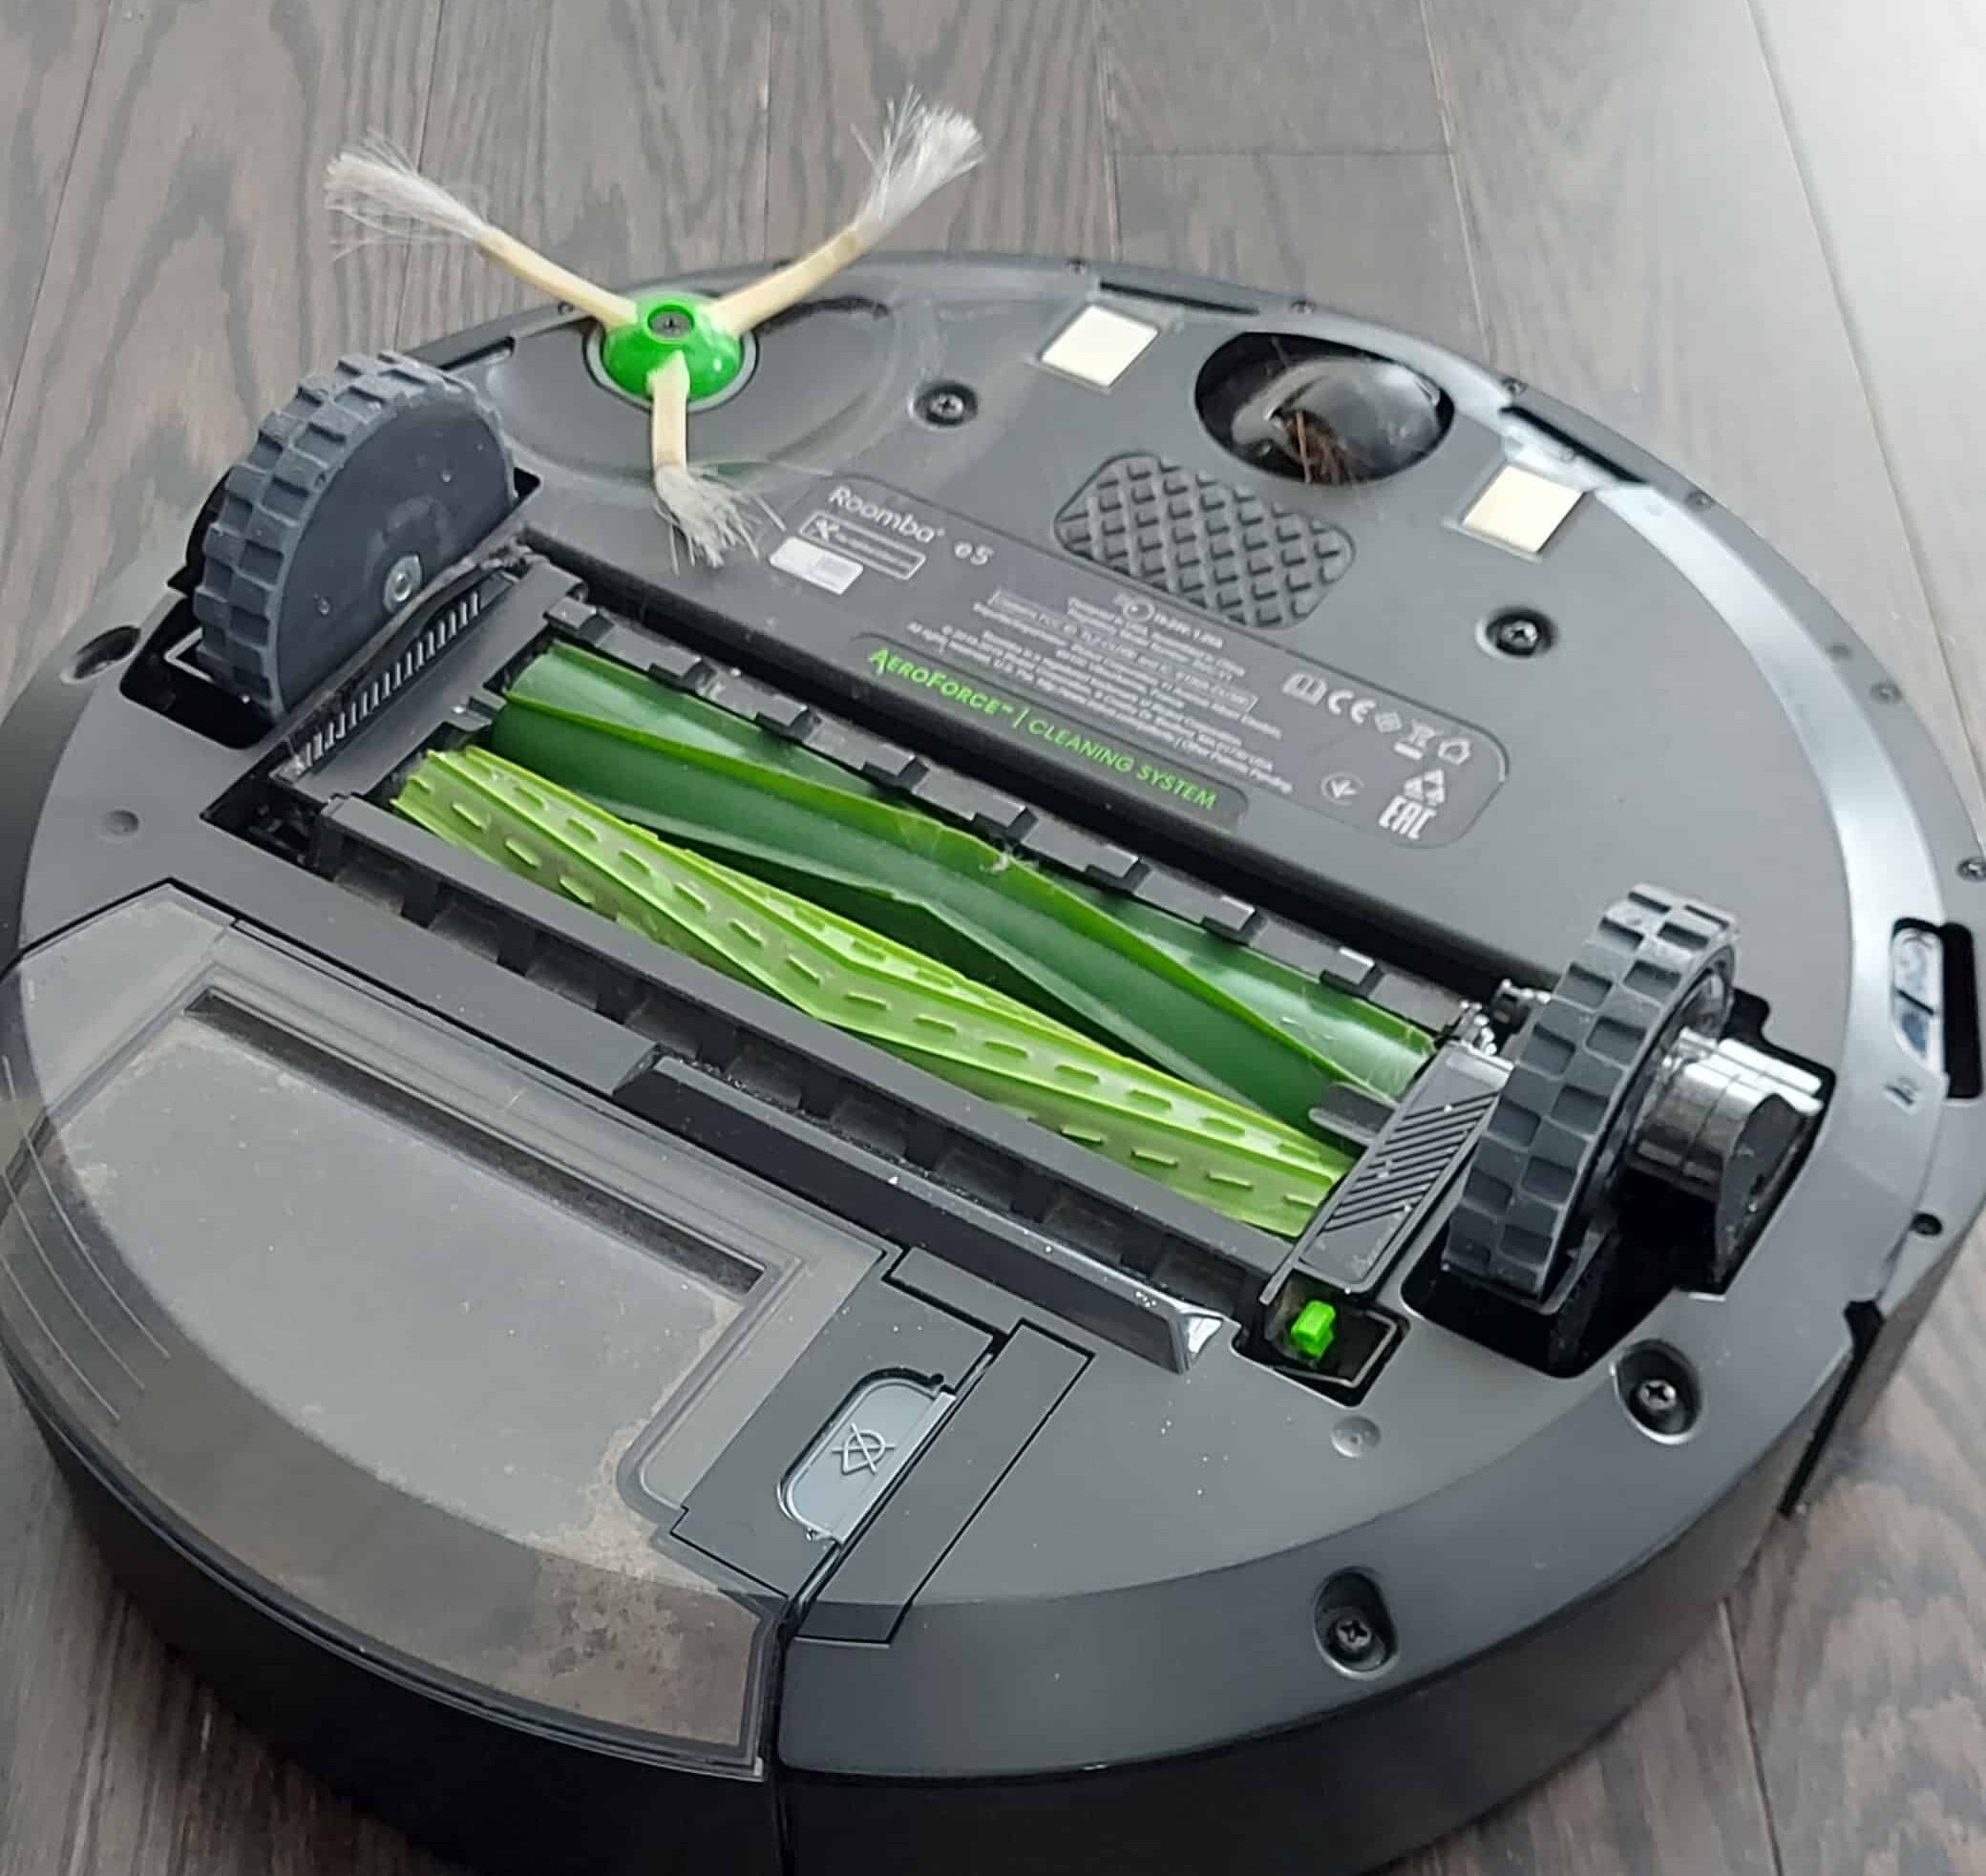 A Comprehensive Guide to Cleaning and Maintaining Your Robotic Vacuum